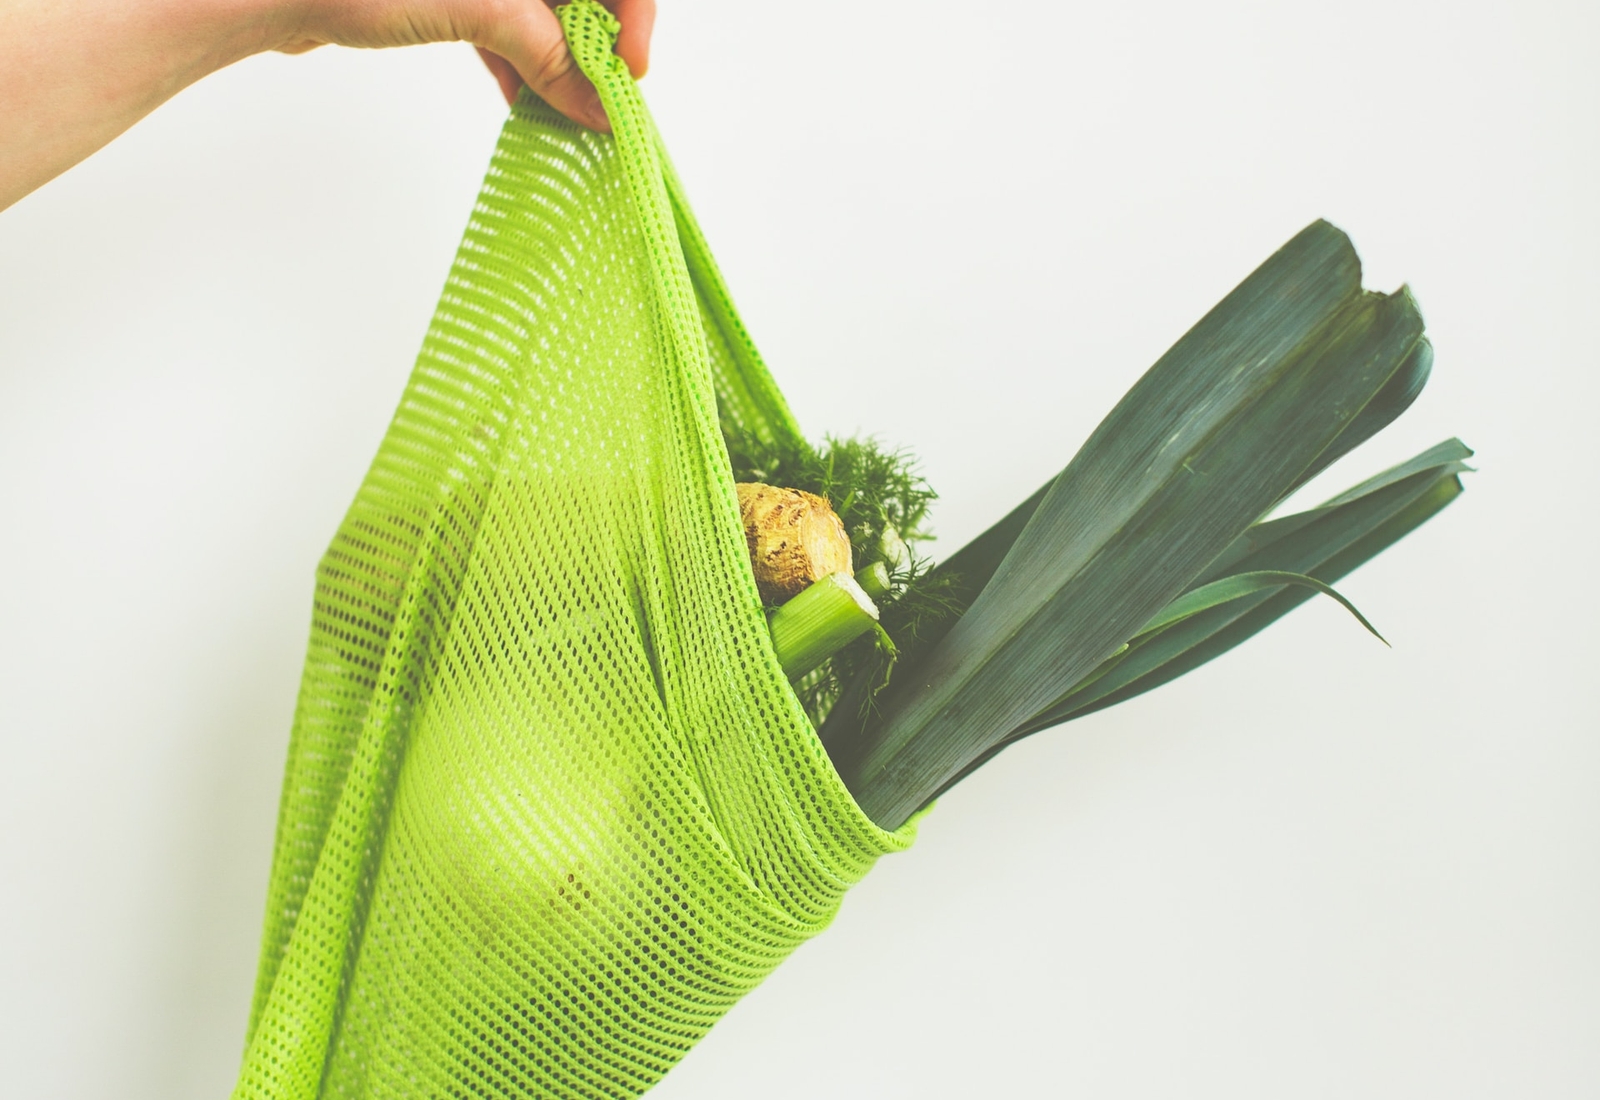 A hand holding a bright green reusable mesh grocery bag containing leeks and a celery root, set against a white background.